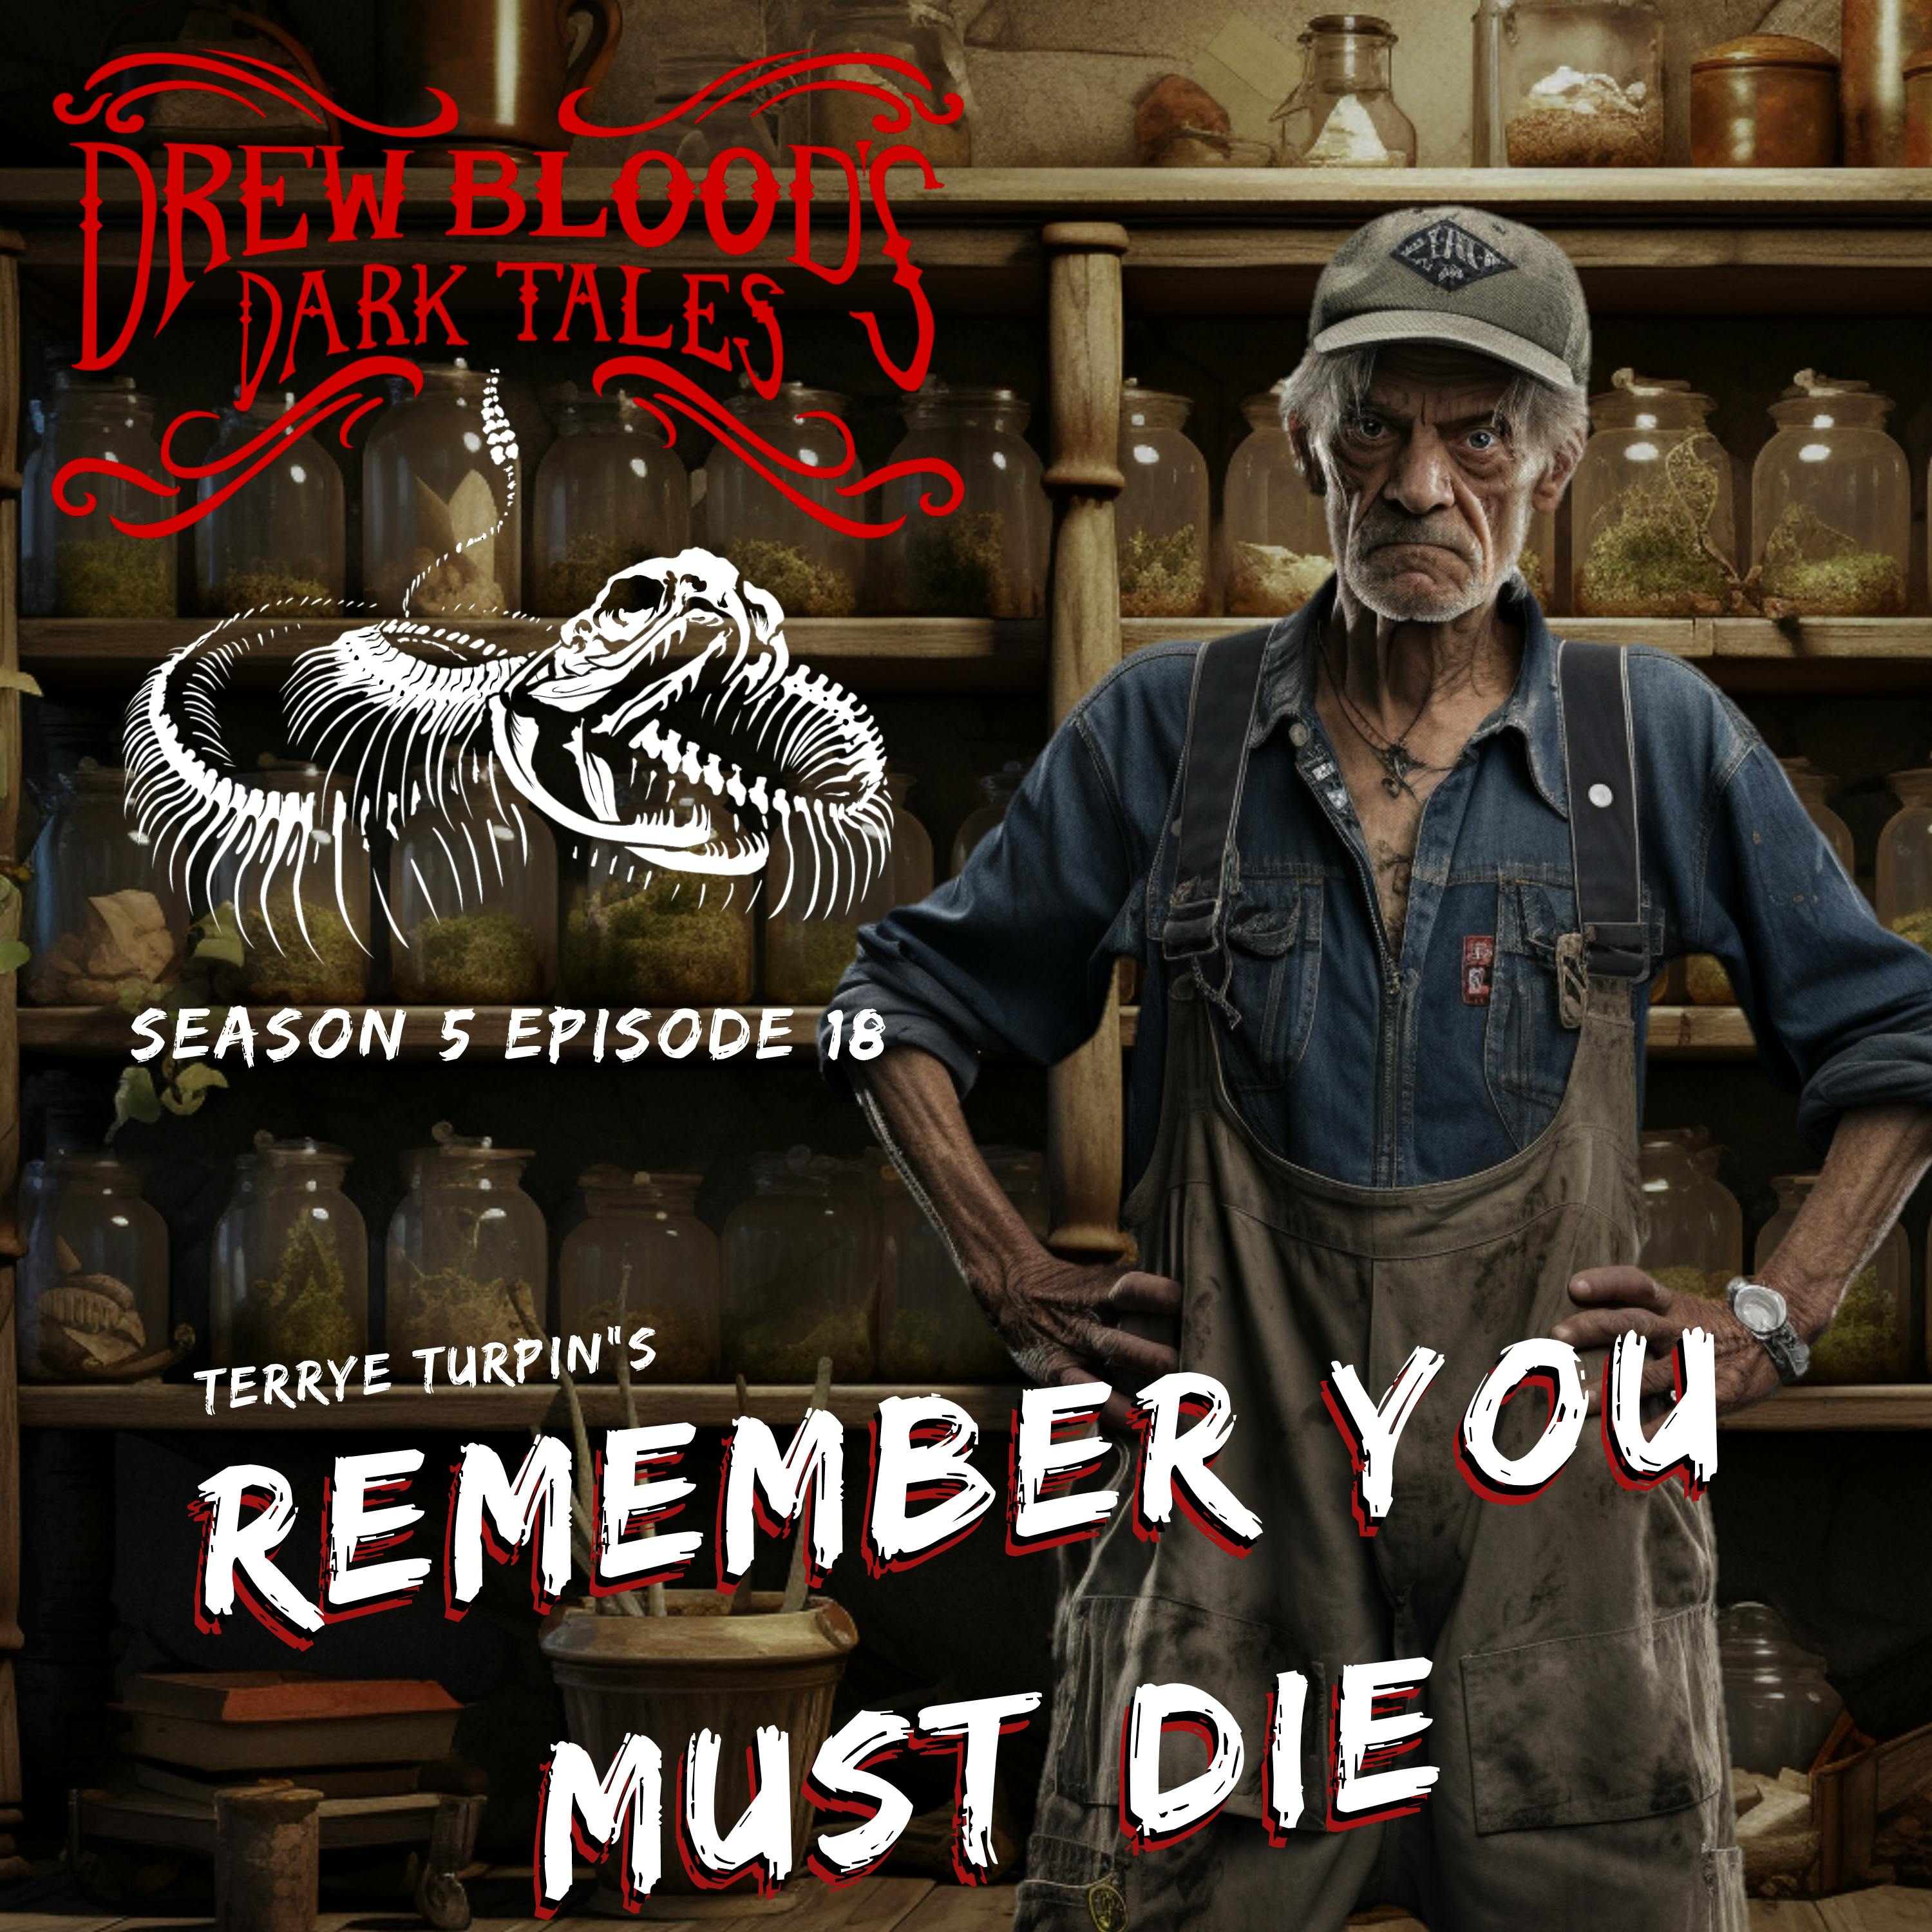 S5E18 - "Remember You Must Die" - Drew Blood